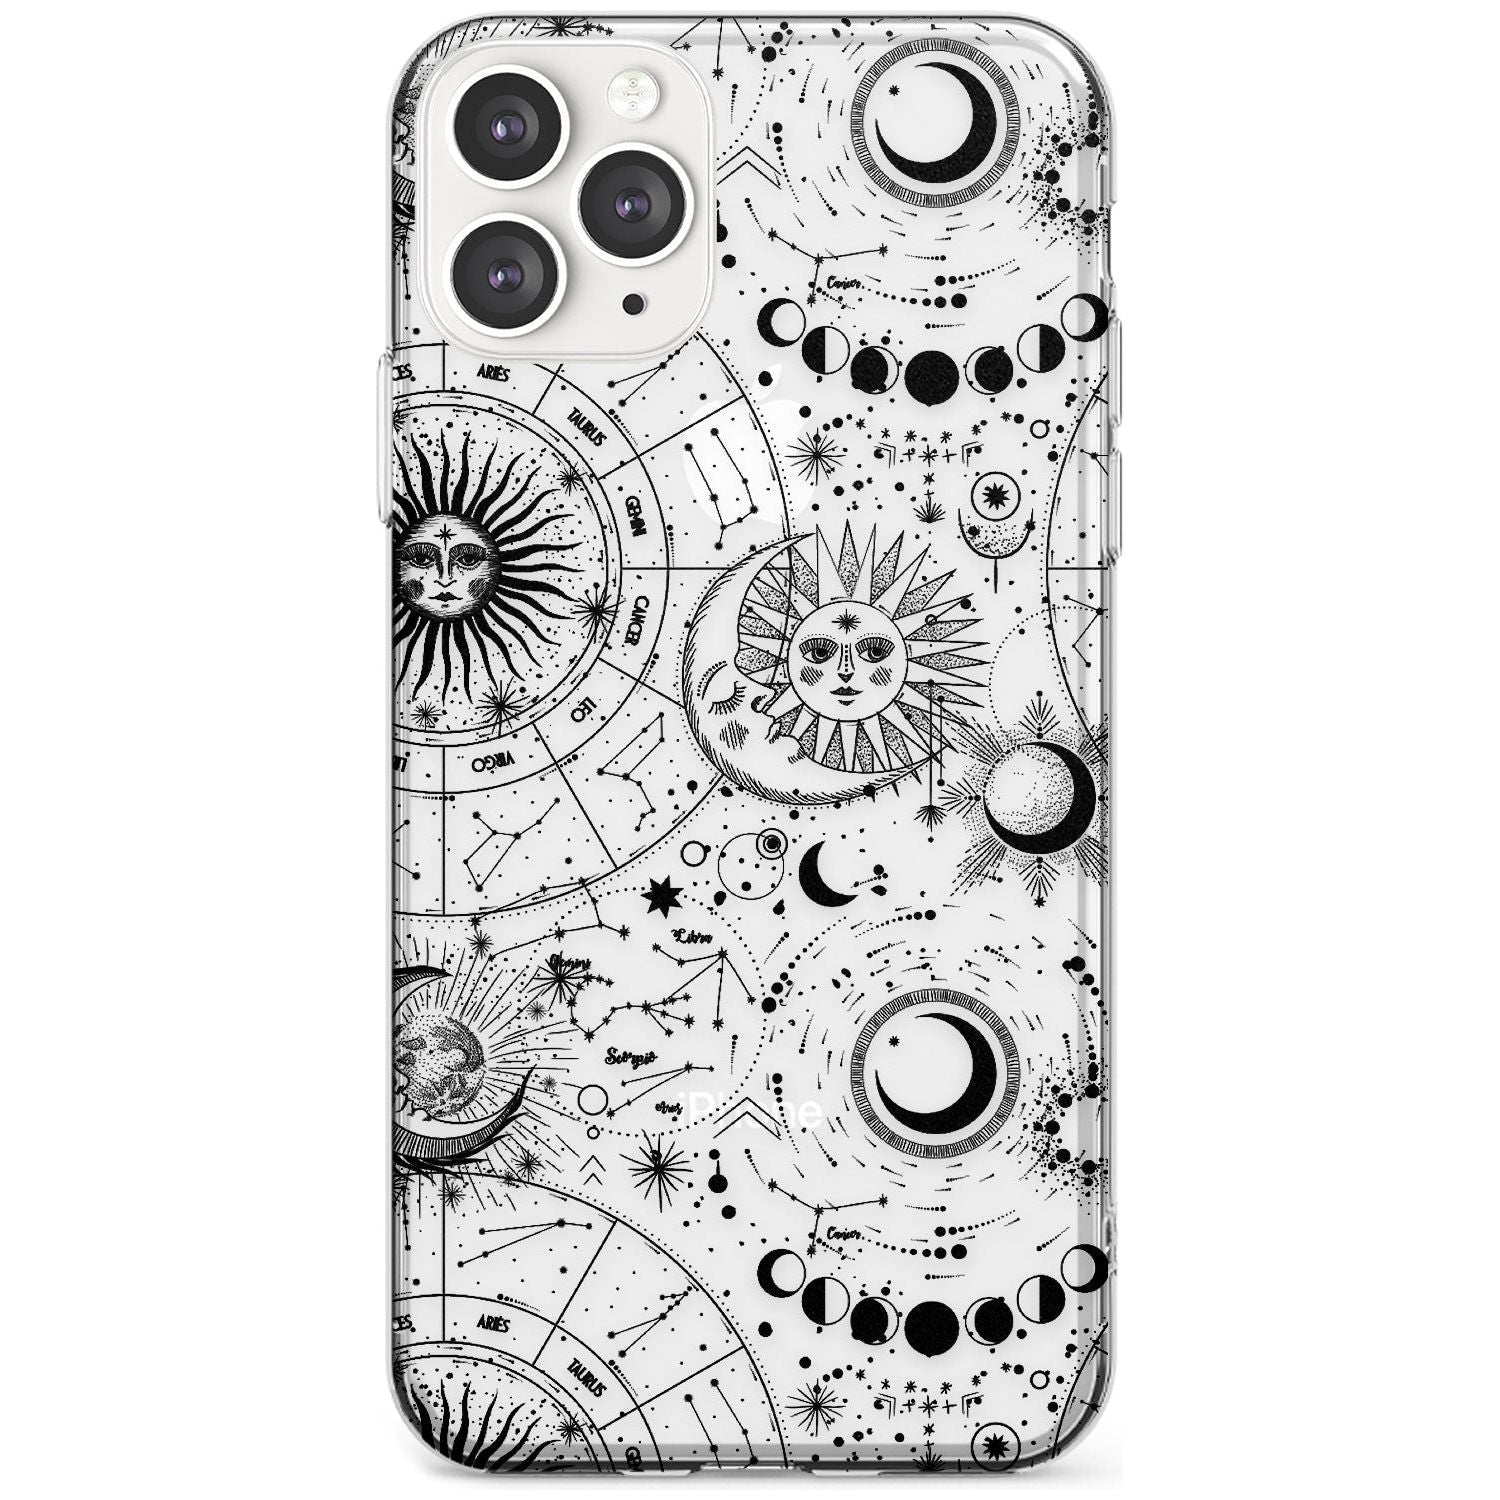 Suns, Moons, Zodiac Signs Astrological Slim TPU Phone Case for iPhone 11 Pro Max